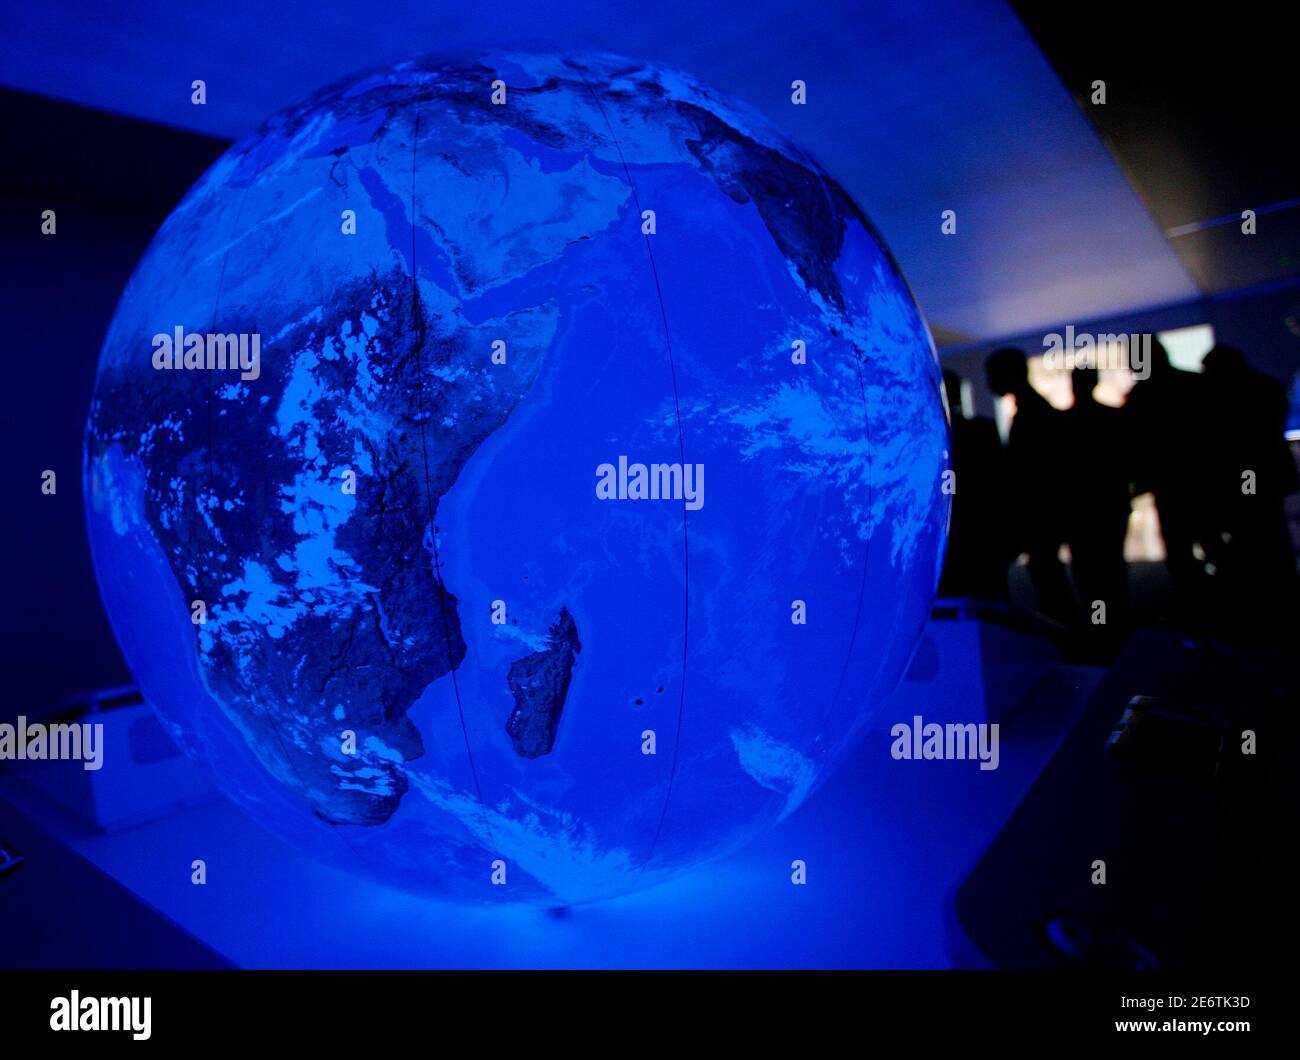 Visitors walk past an illuminated globe displayed on an information stand about Hybrid Synergy drive at the Frankfurt International Auto Show IAA in Frankfurt September 12, 2007. After two days for the media and analysts the Frankfurt motorshow will be open to the public from September 13 to 23. Green technology and lower fuel consumption will be a big theme at the largest and most prestigious auto show in the world this year.  REUTERS/Christian Charisius (GERMANY) Stock Photo